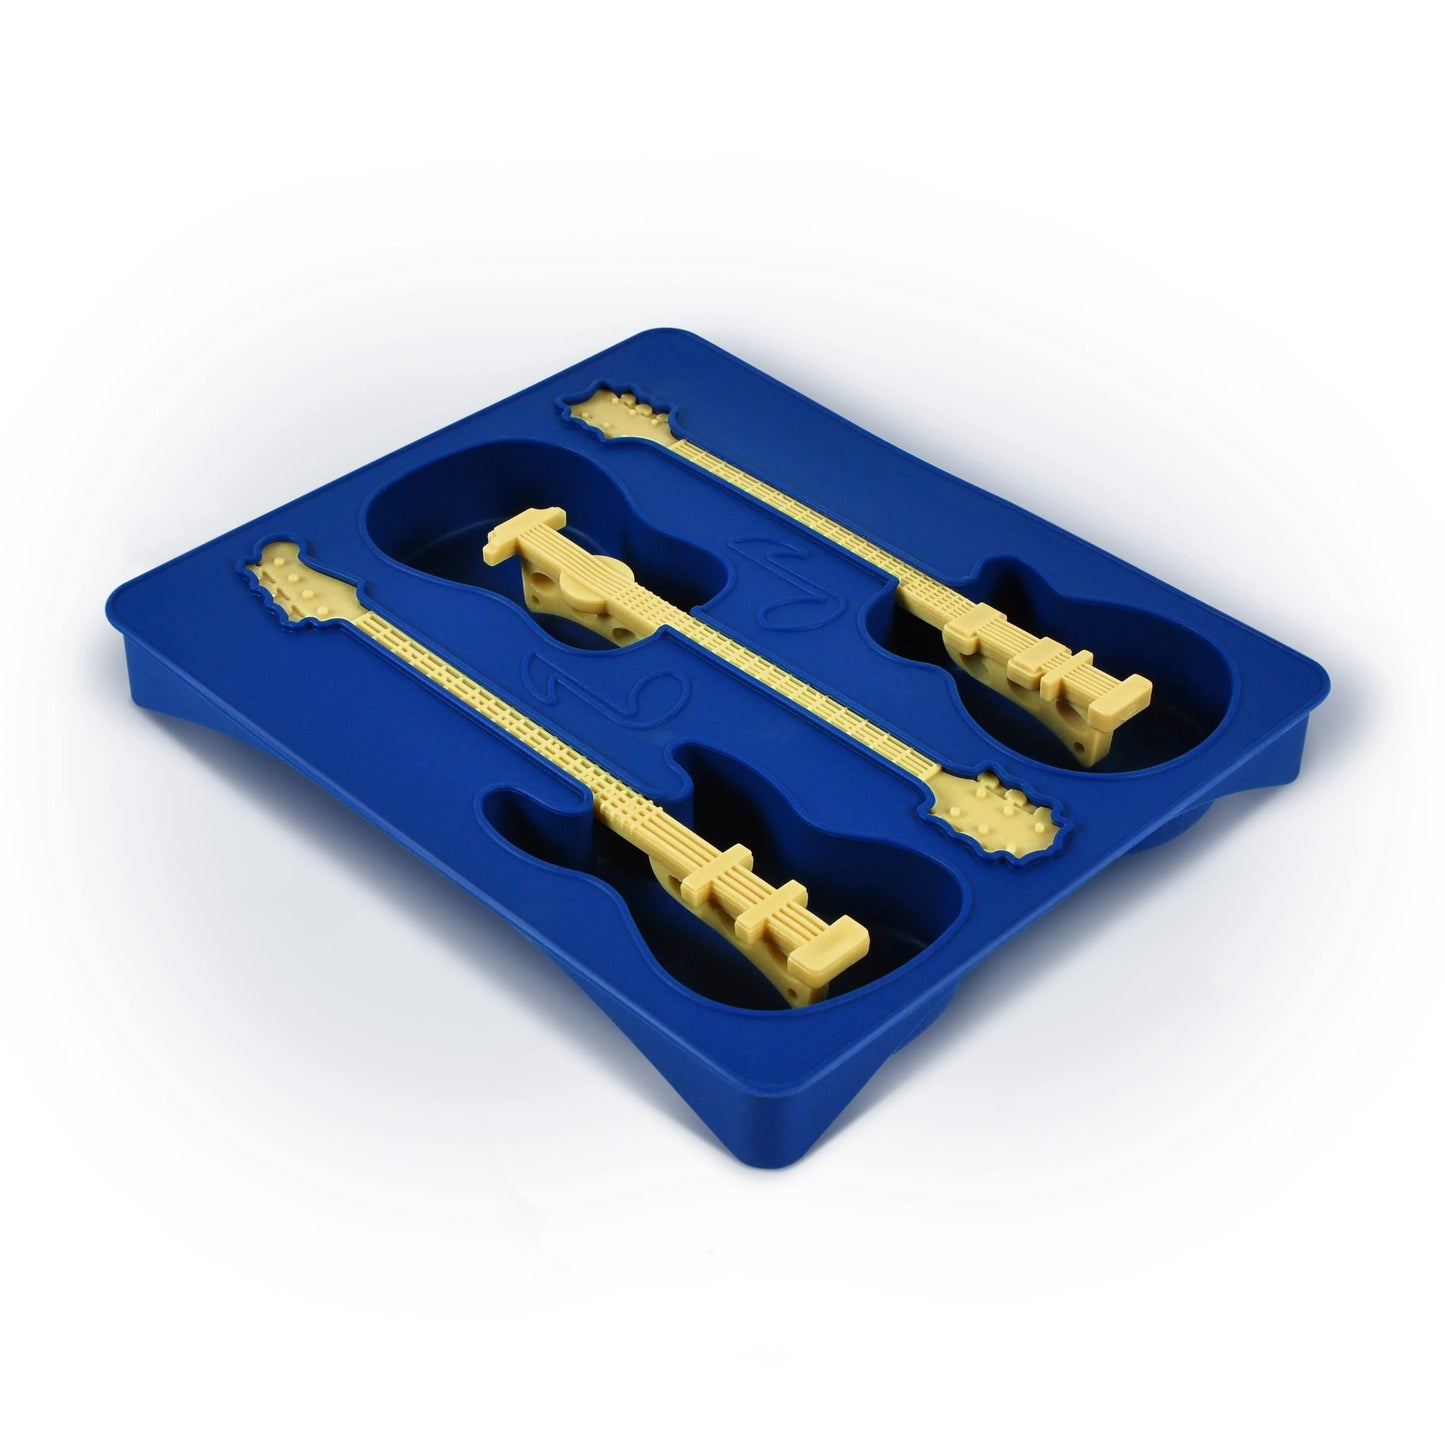 blue ice tray with guitar shaped ice molds.